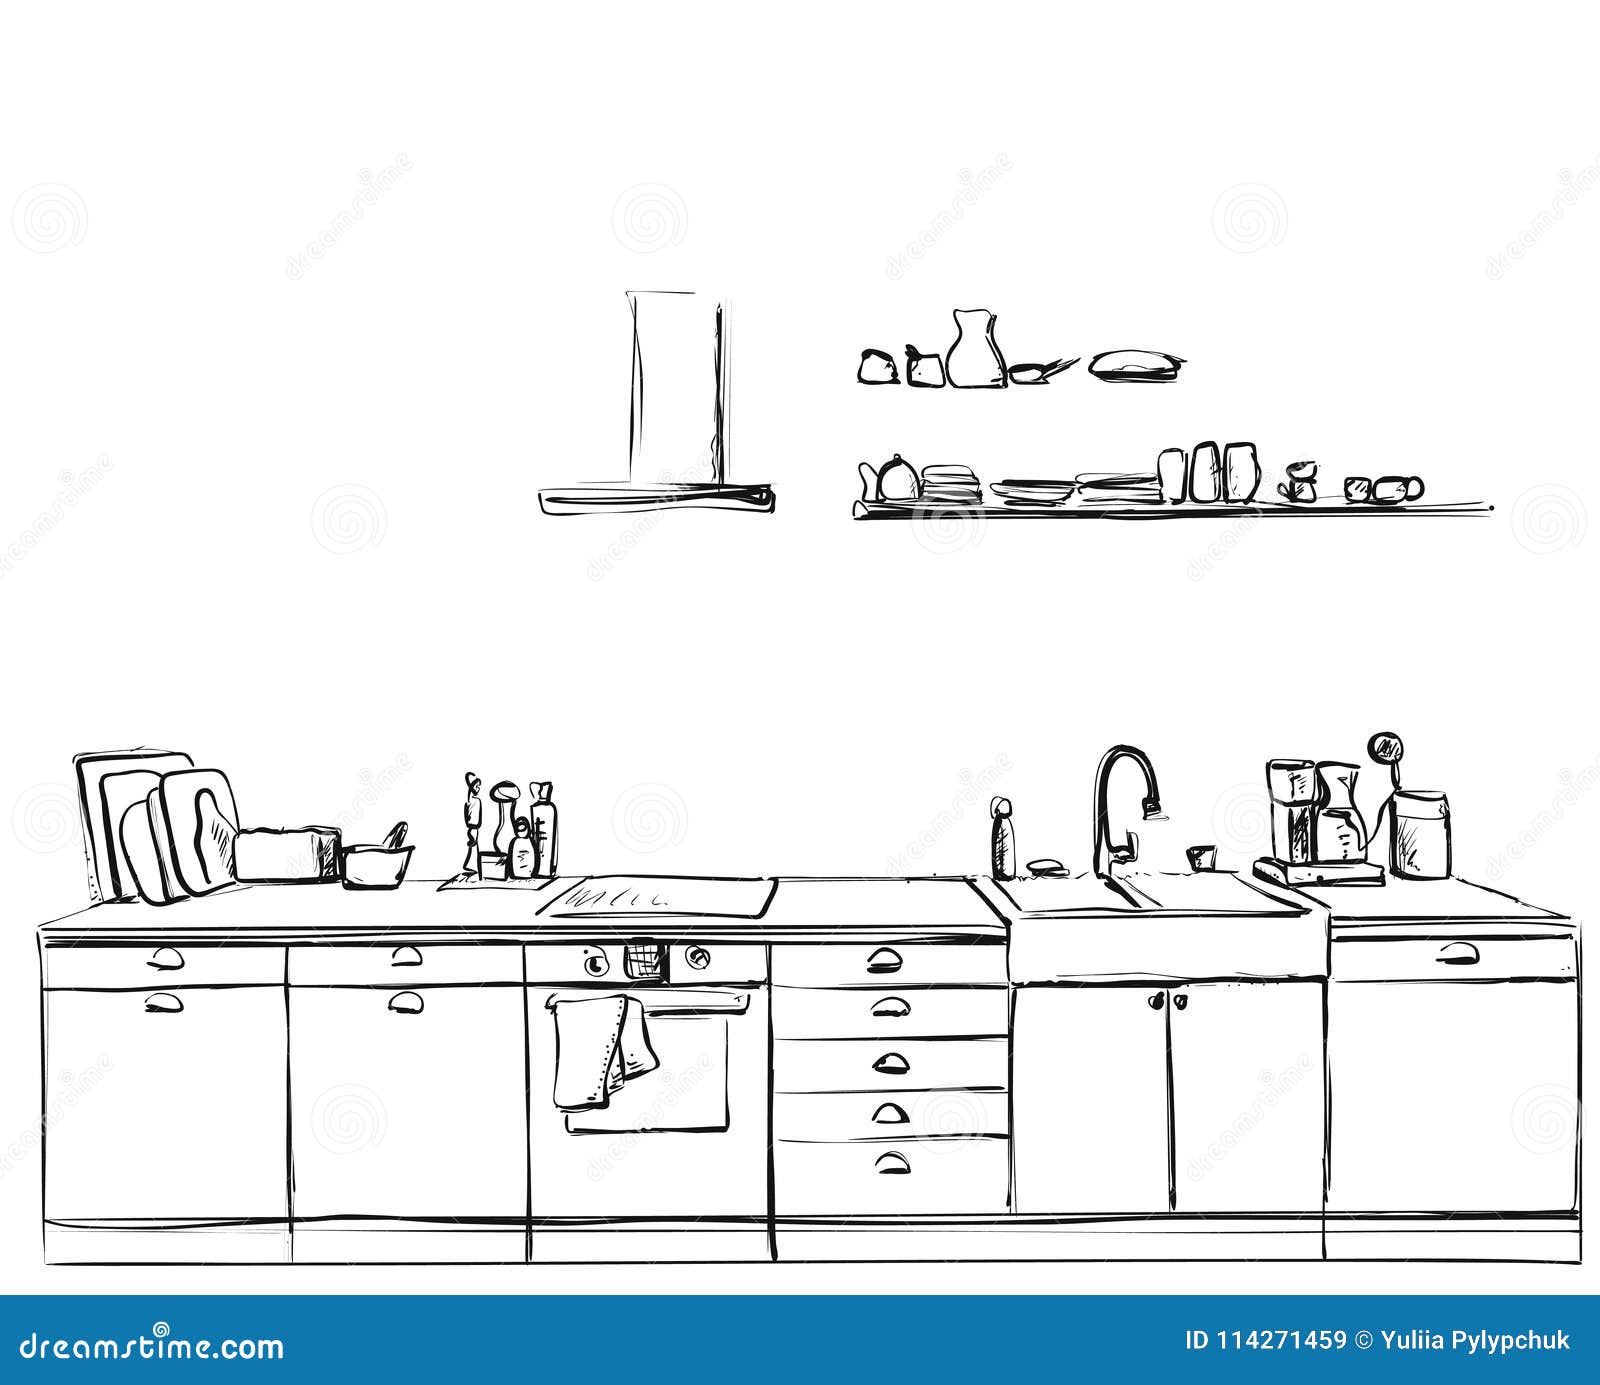 Kitchen cupboard furniture sketch Royalty Free Vector Image